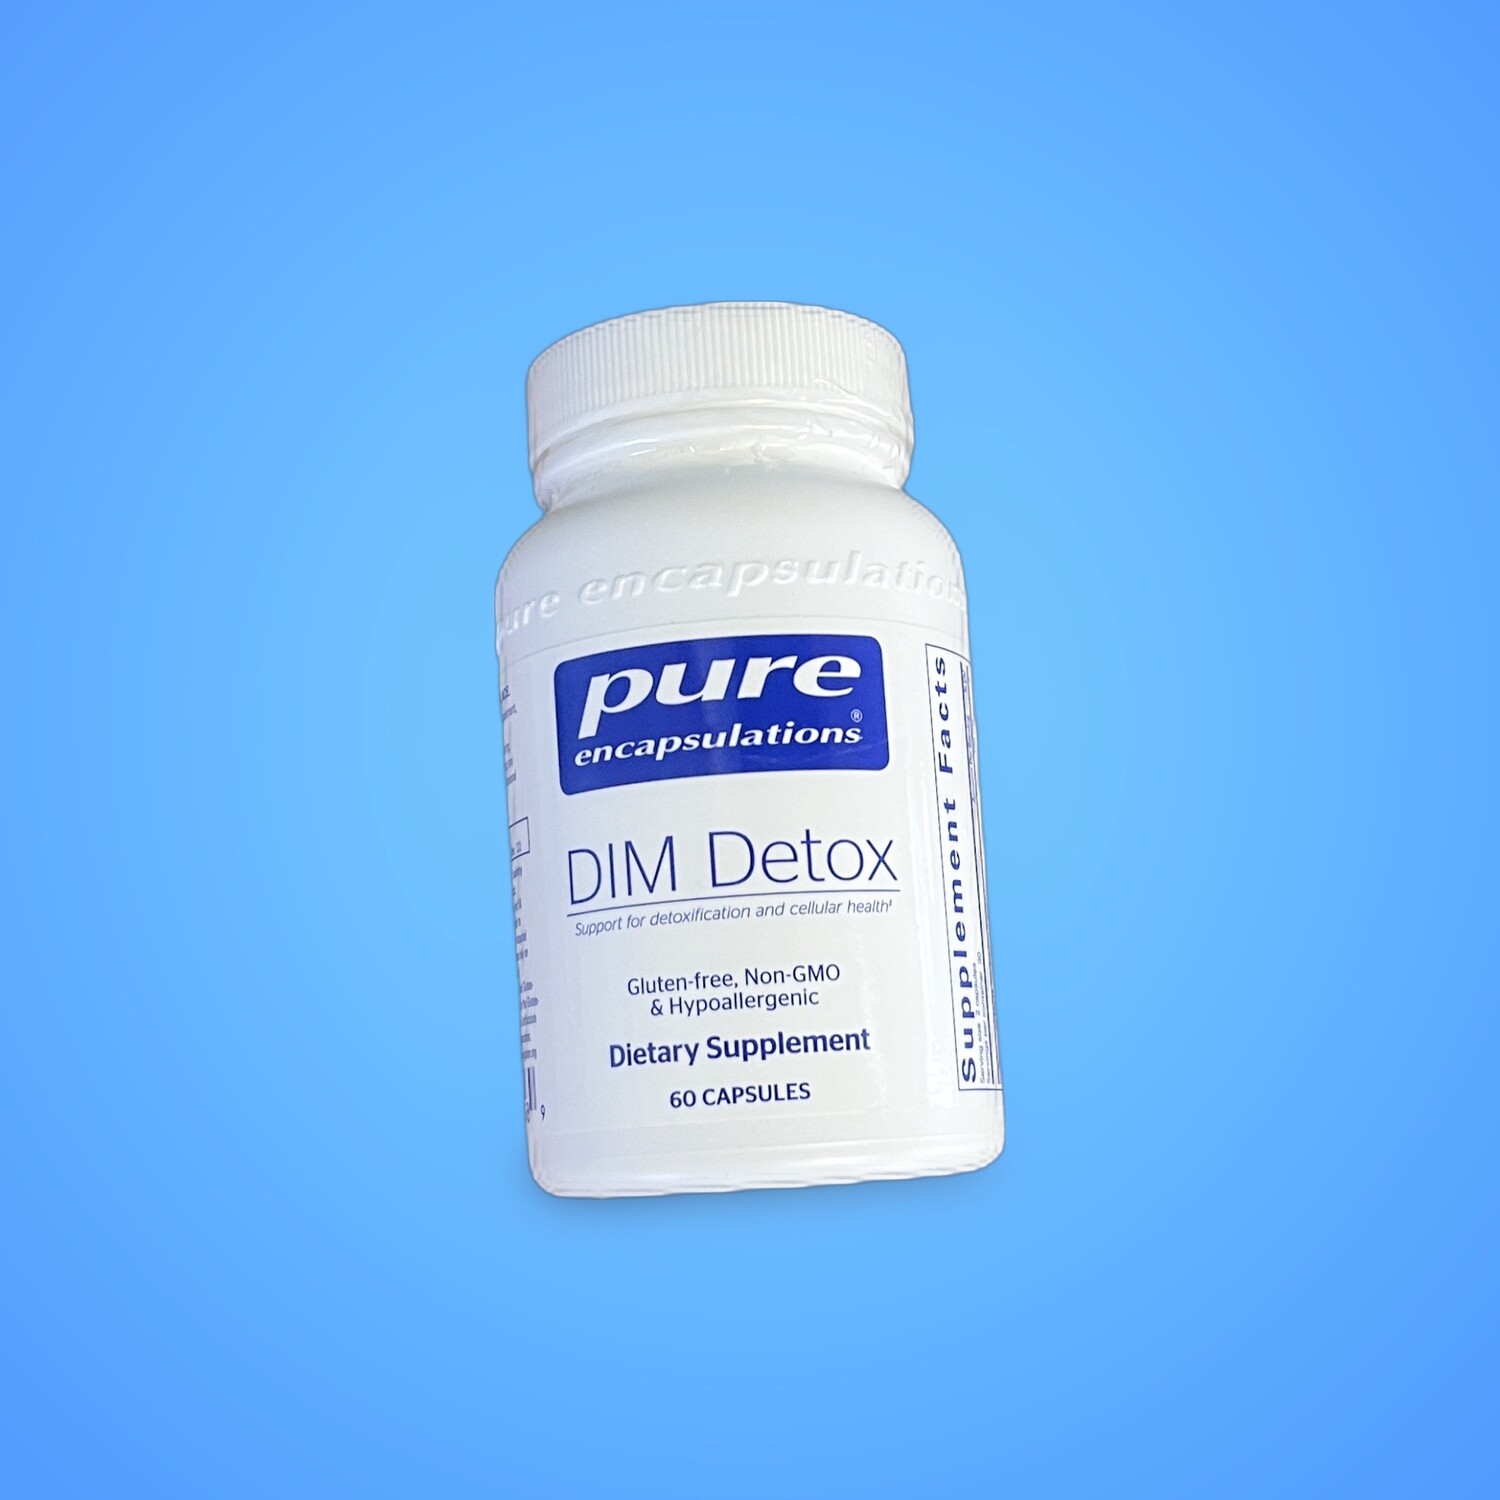 Dim Detox - Supplement Support for Detoxification and Cellular Health*